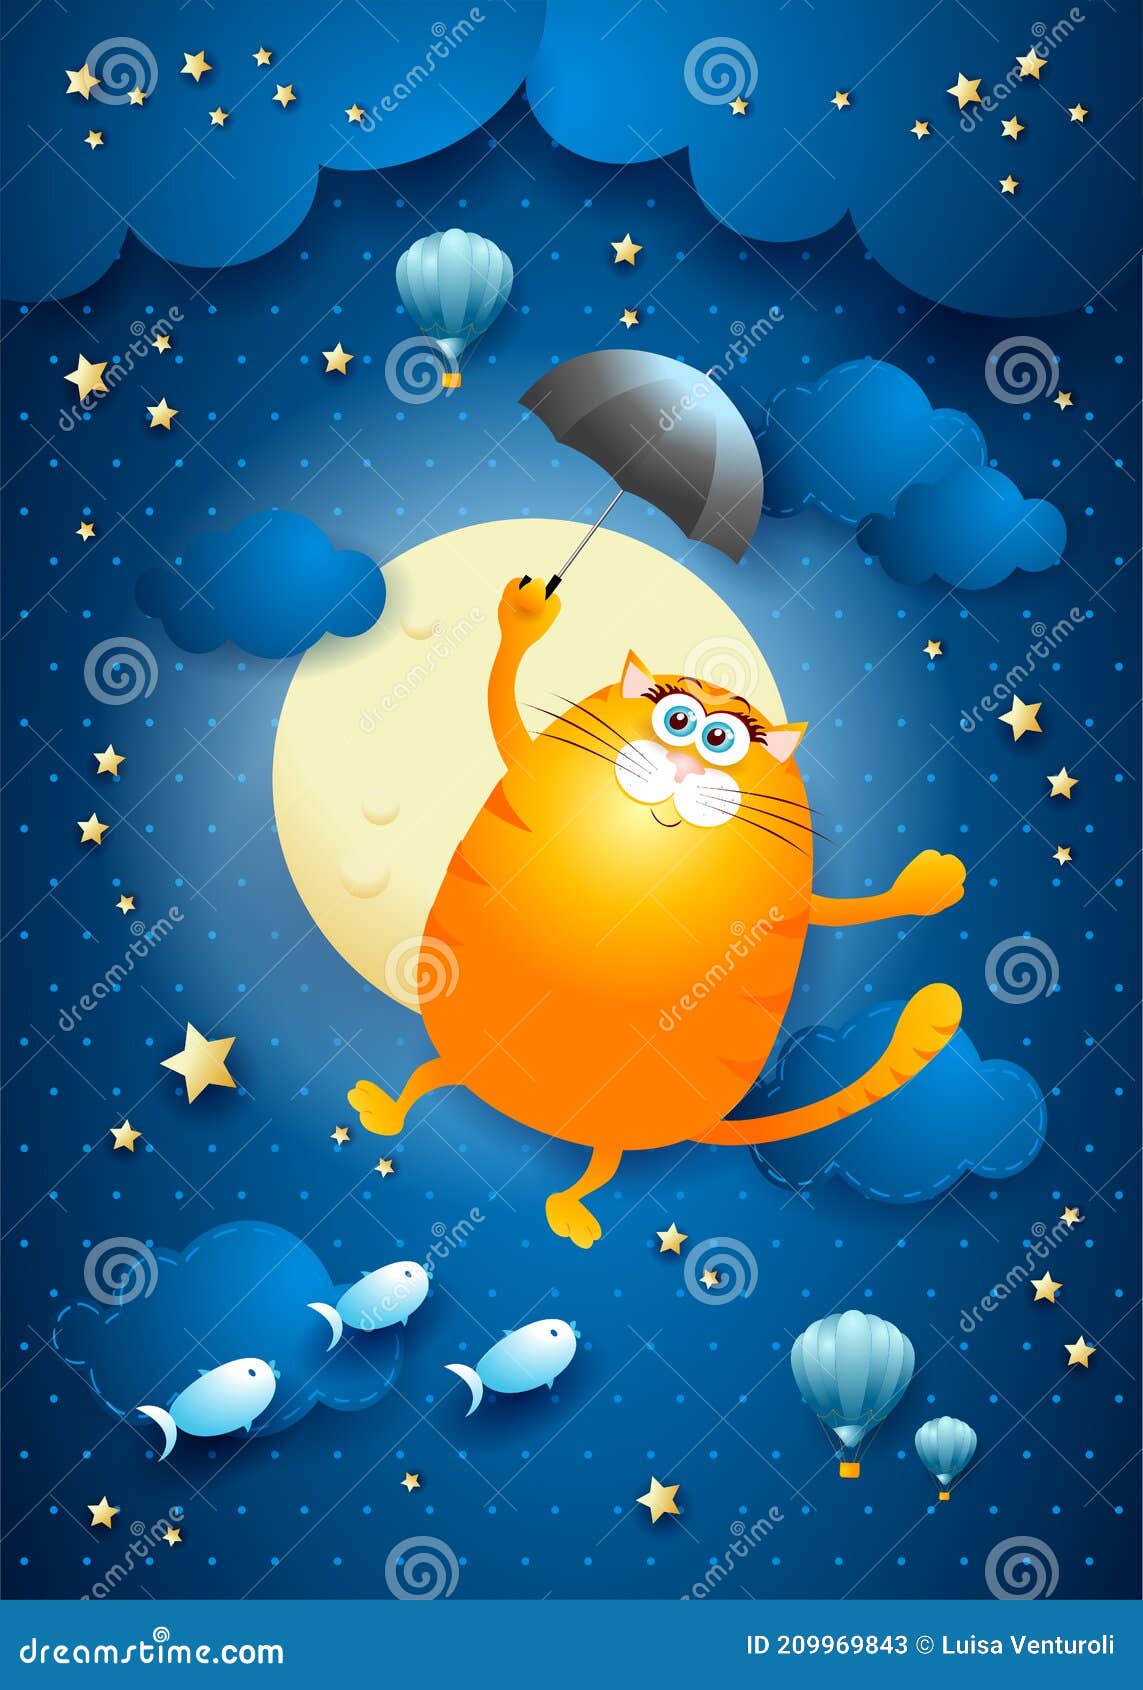 cute flying cat with umbrella on starry sky